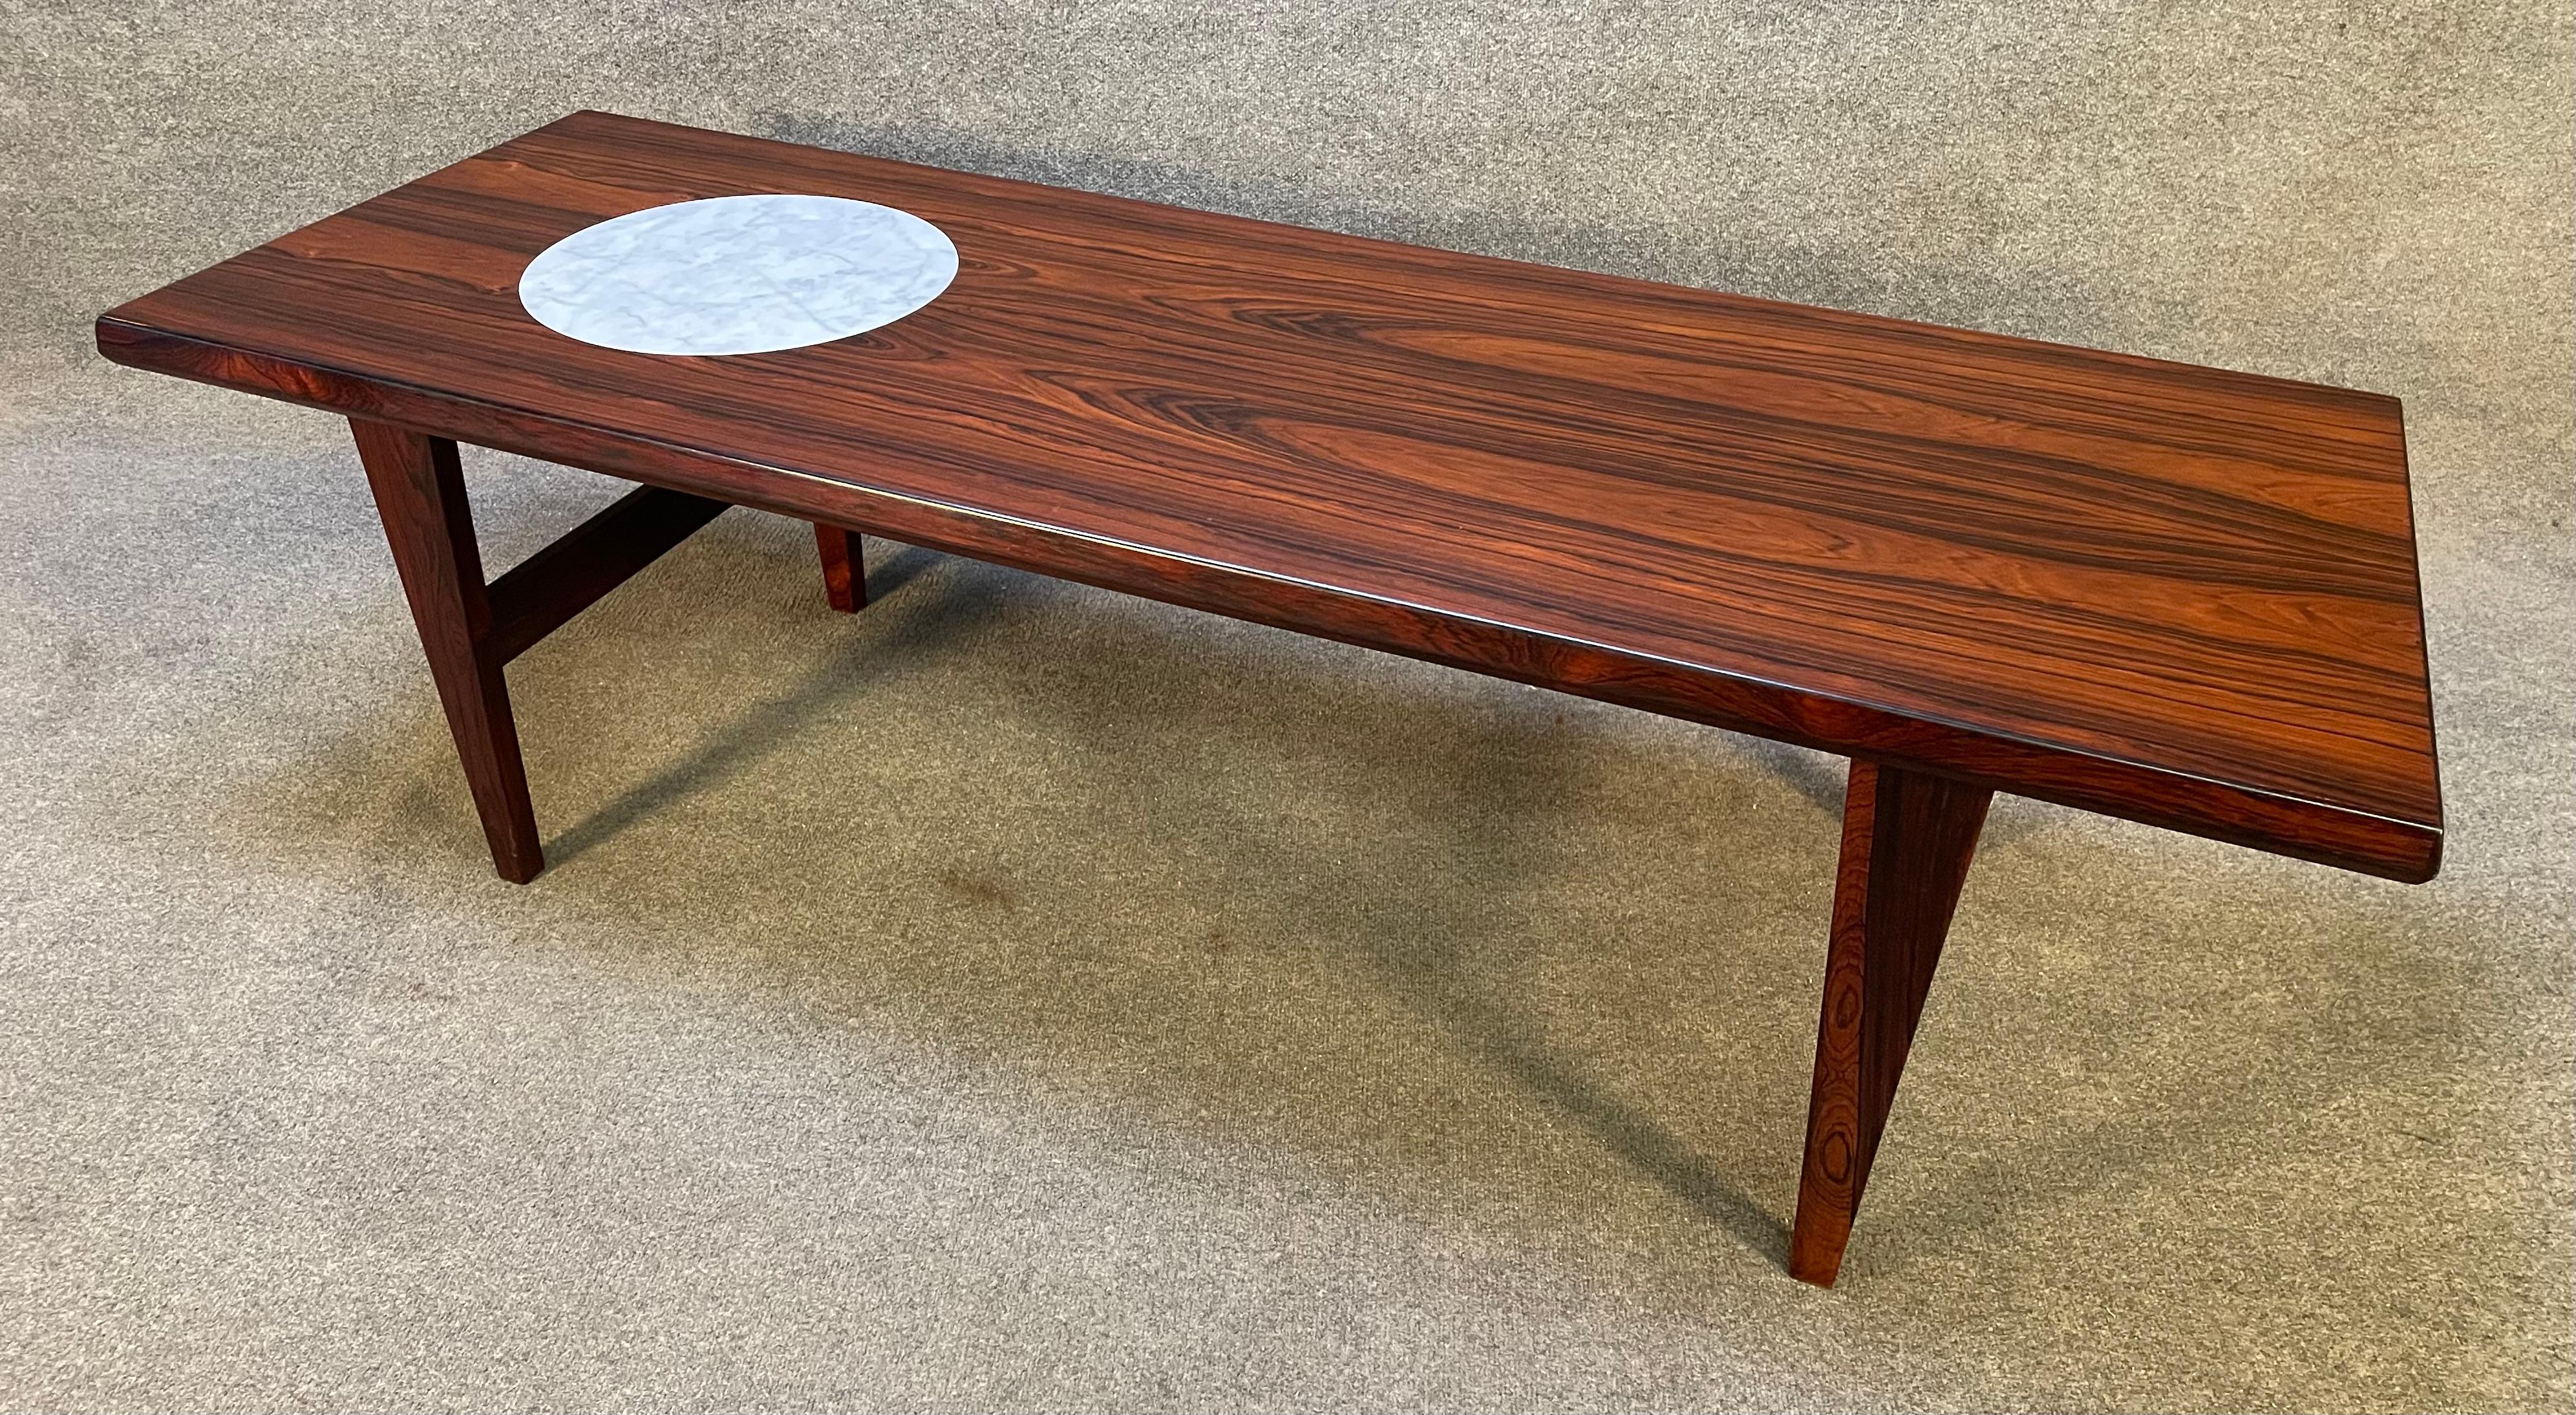 Mid-20th Century Vintage Danish Mid-Century Modern Rosewood and Marble Coffee Table For Sale